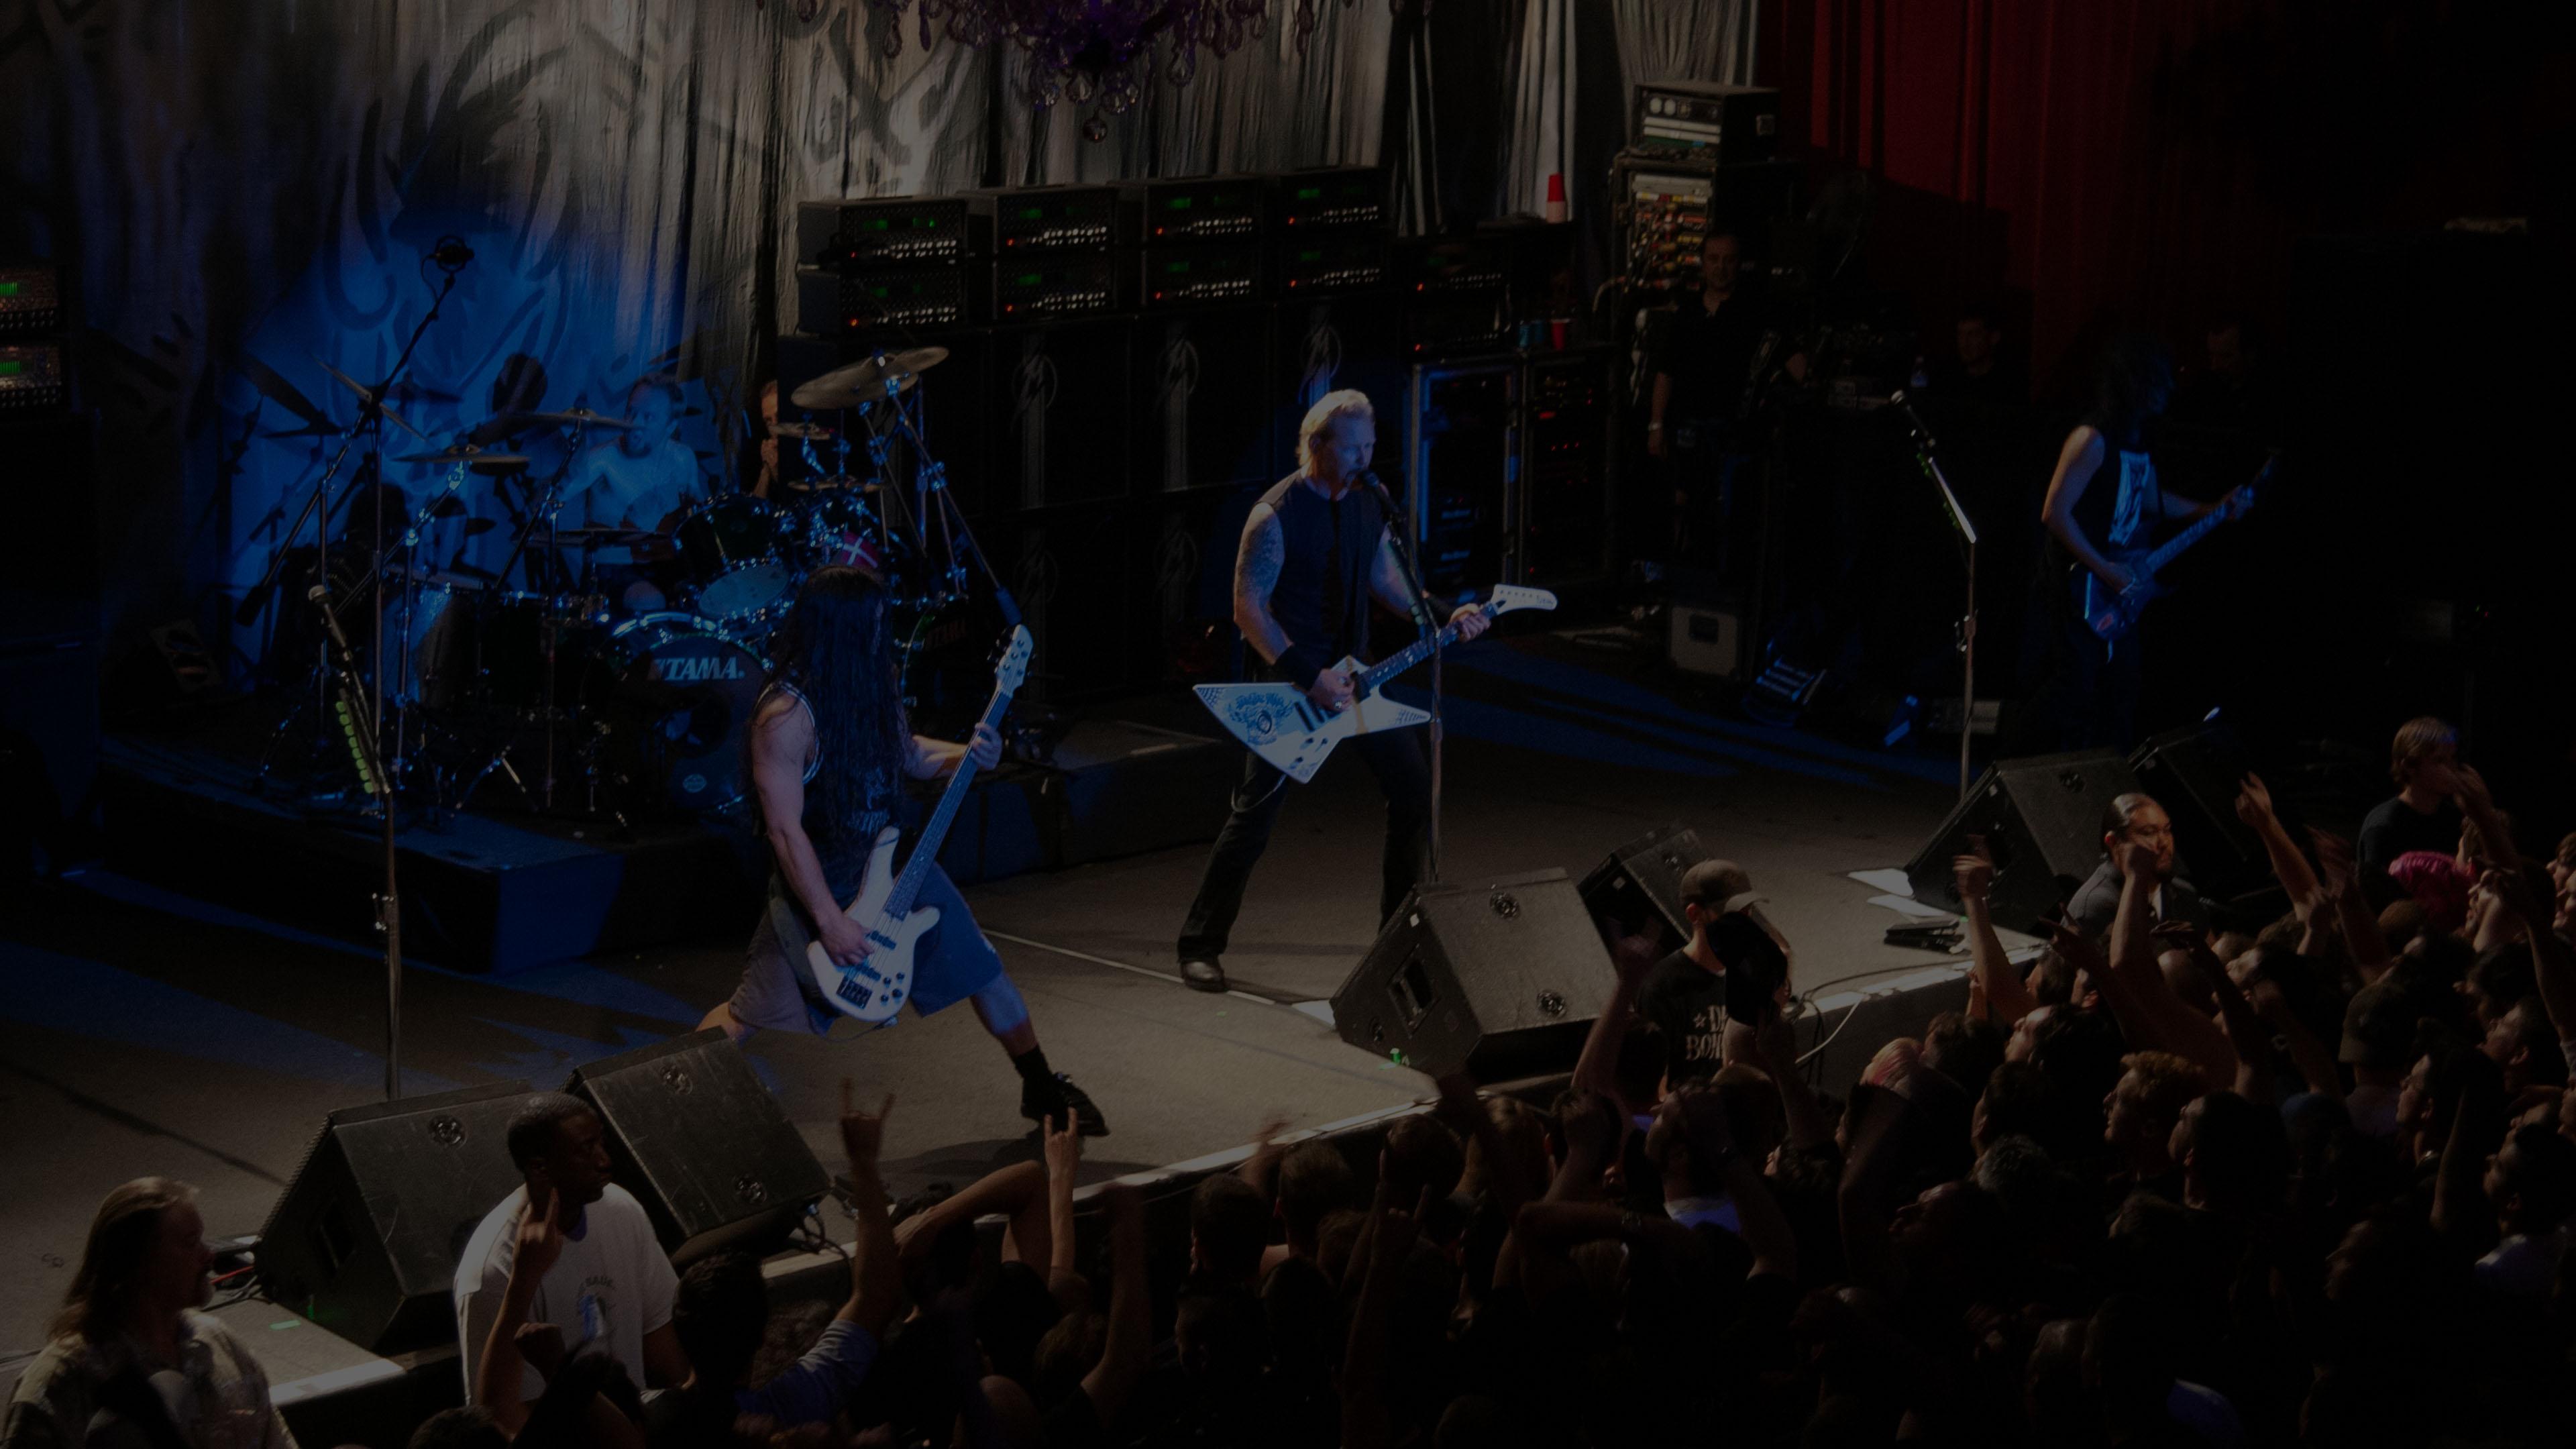 Metallica at The Fillmore in San Francisco, CA on May 19, 2003